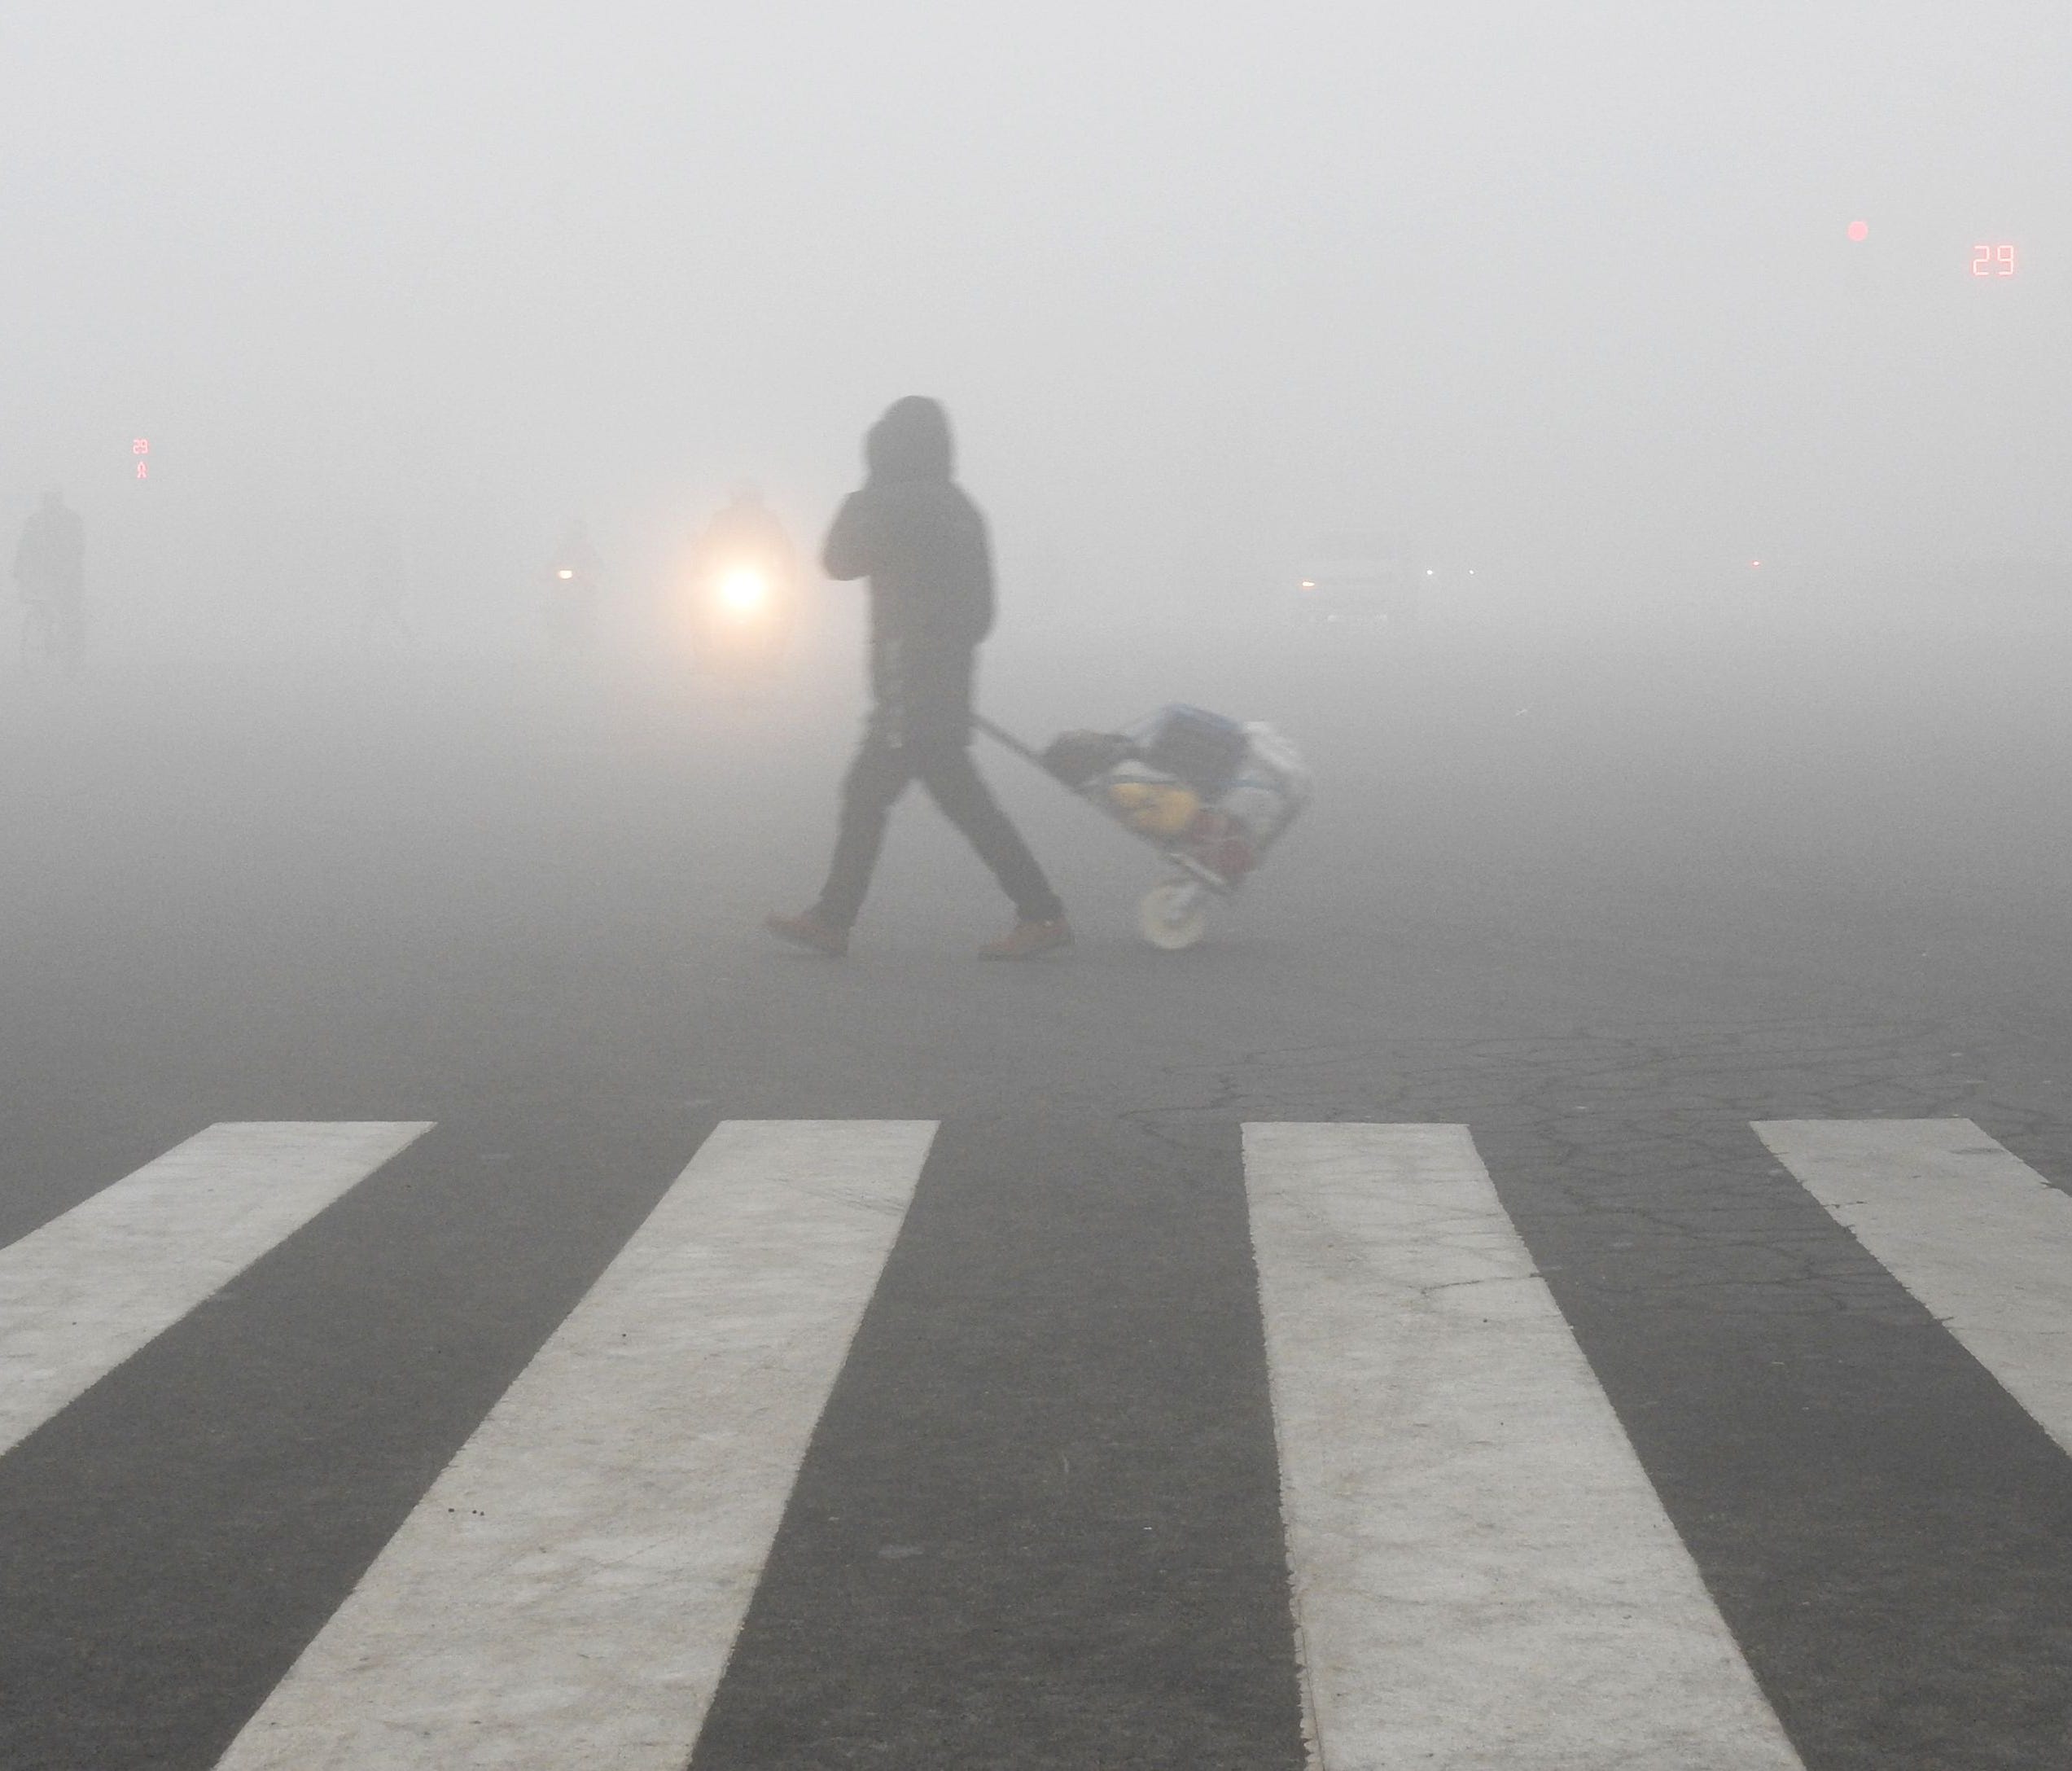 A pedestrian crosses a smog-shrouded street in Lianyungang, eastern China's Jiangsu province on December 19, 2016.